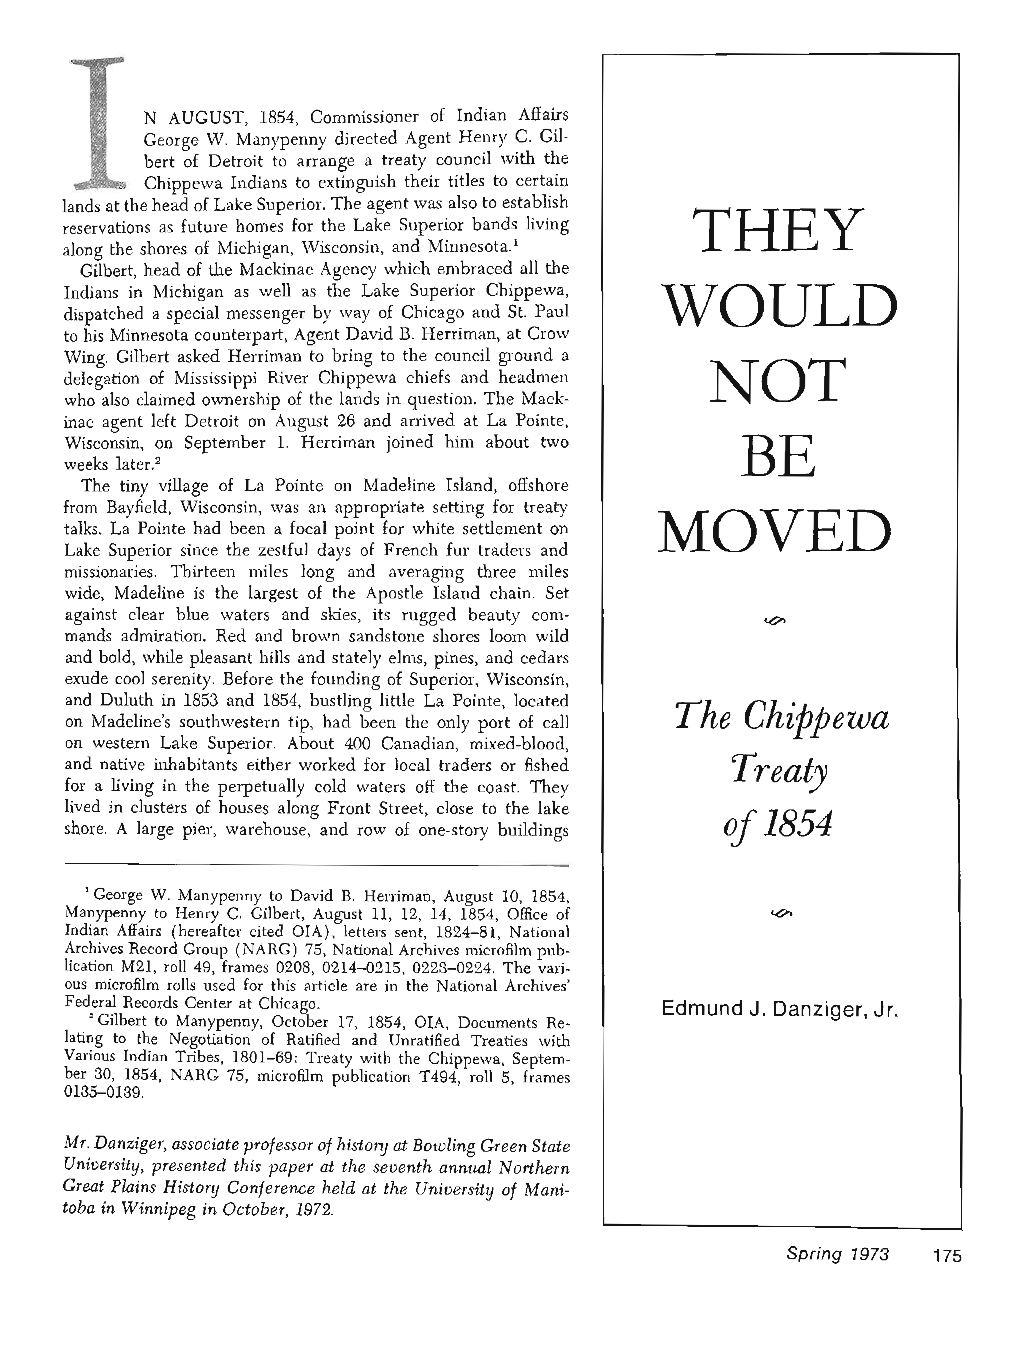 They Would Not Be Moved : the Chippewa Treaty of 1854 / Edmund